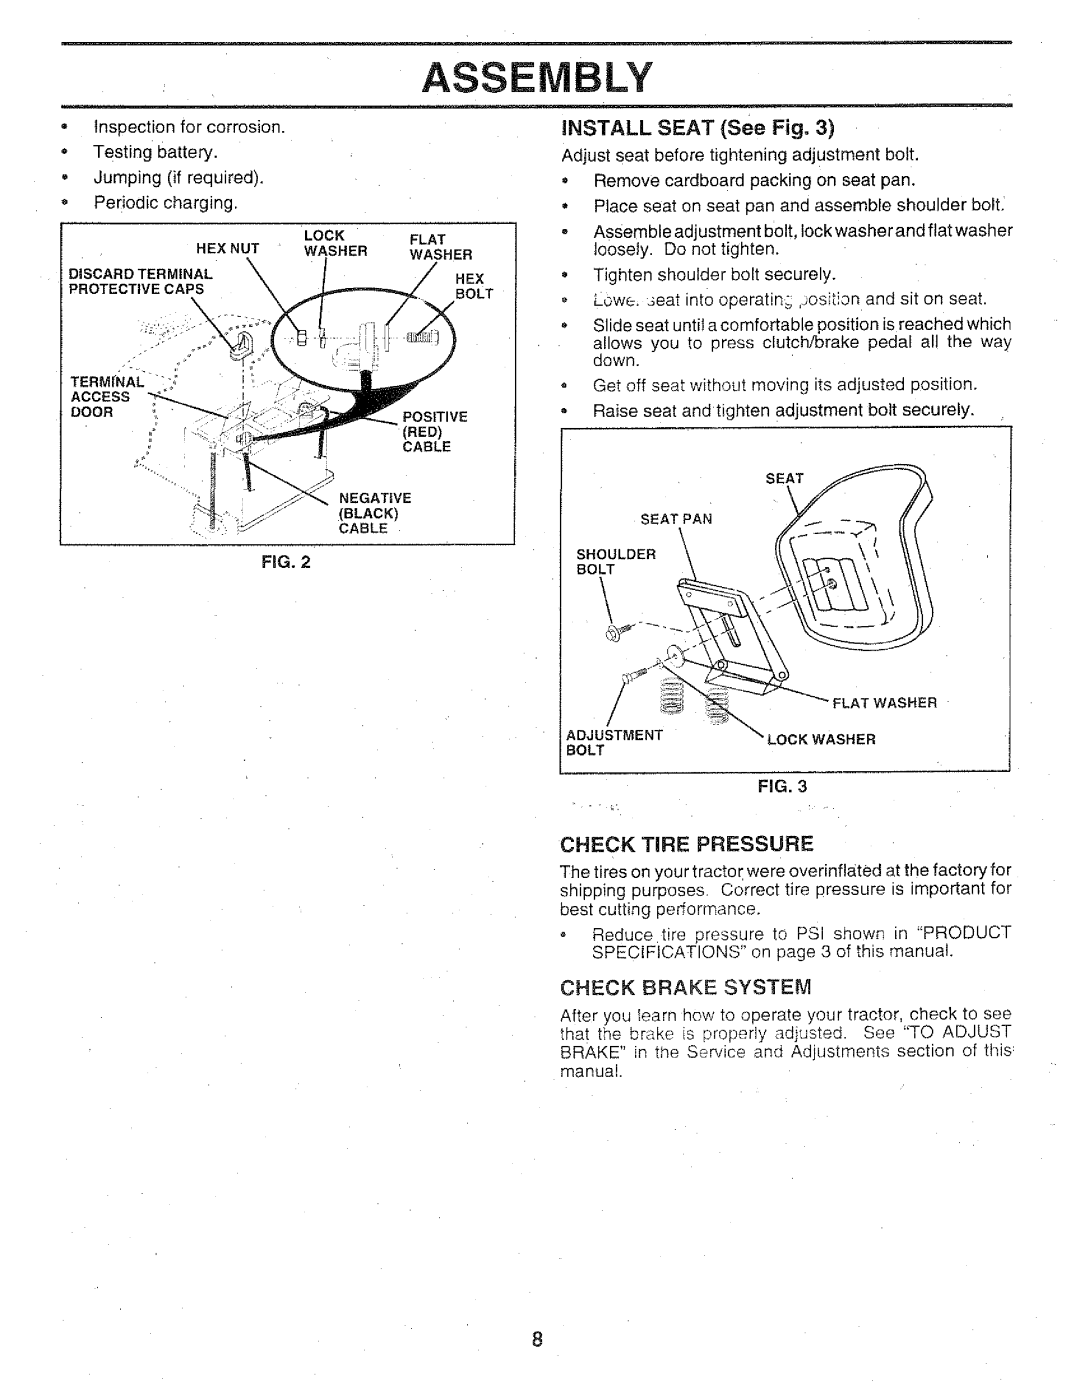 Sears 917.25147 owner manual Assembly, INSTALL SEAT See Fig, Check Tire Pressure, Check Brake System 